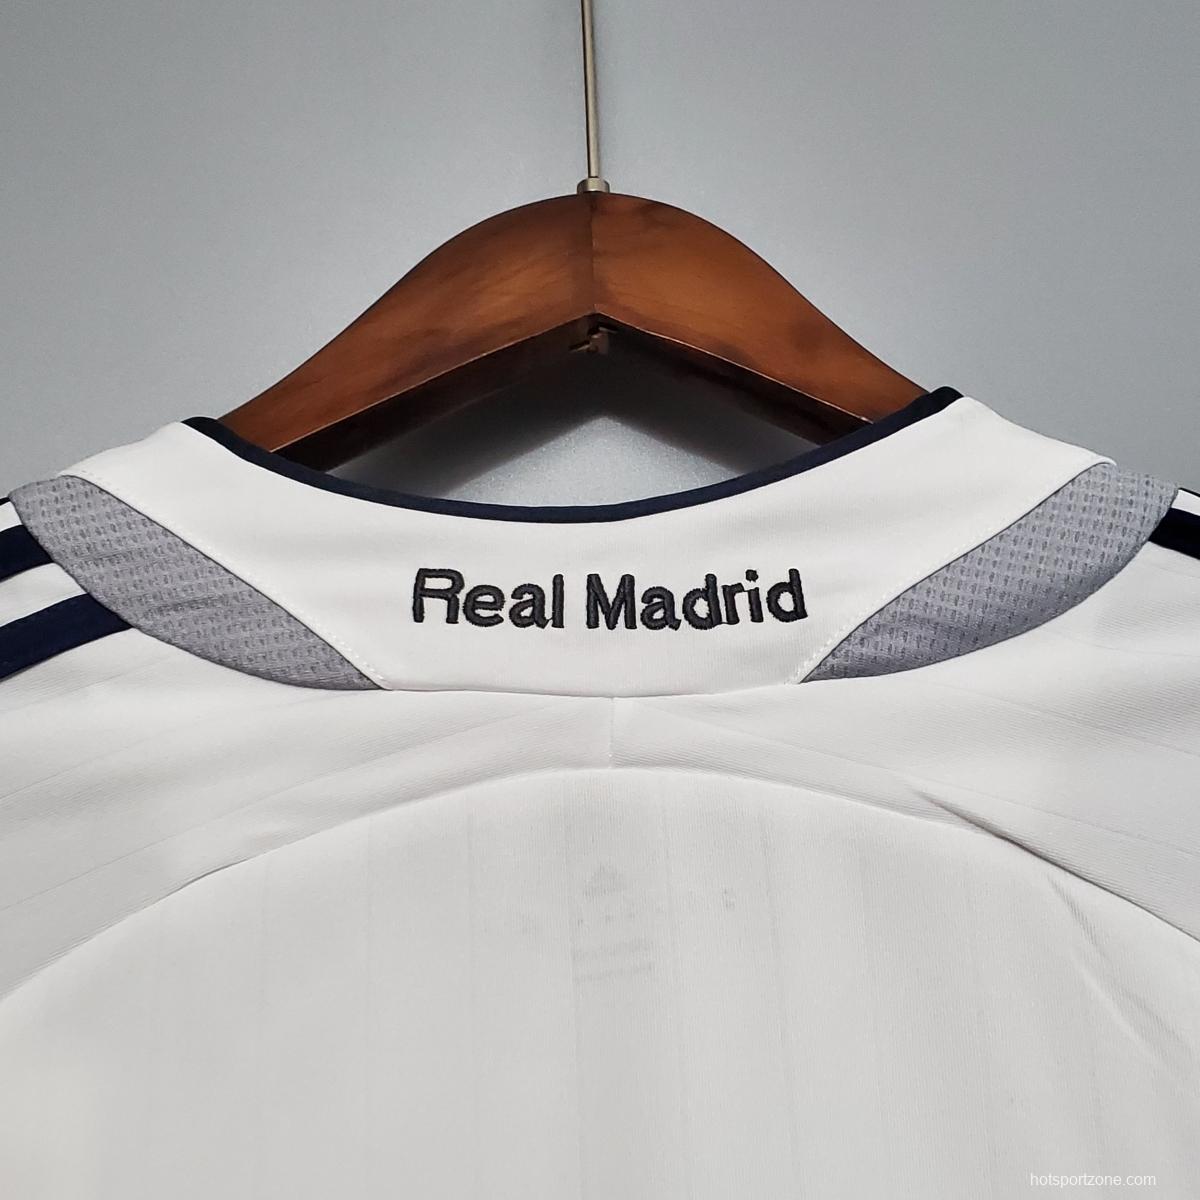 Retro Real Madrid Long sleeve 06/07 home Soccer Jersey